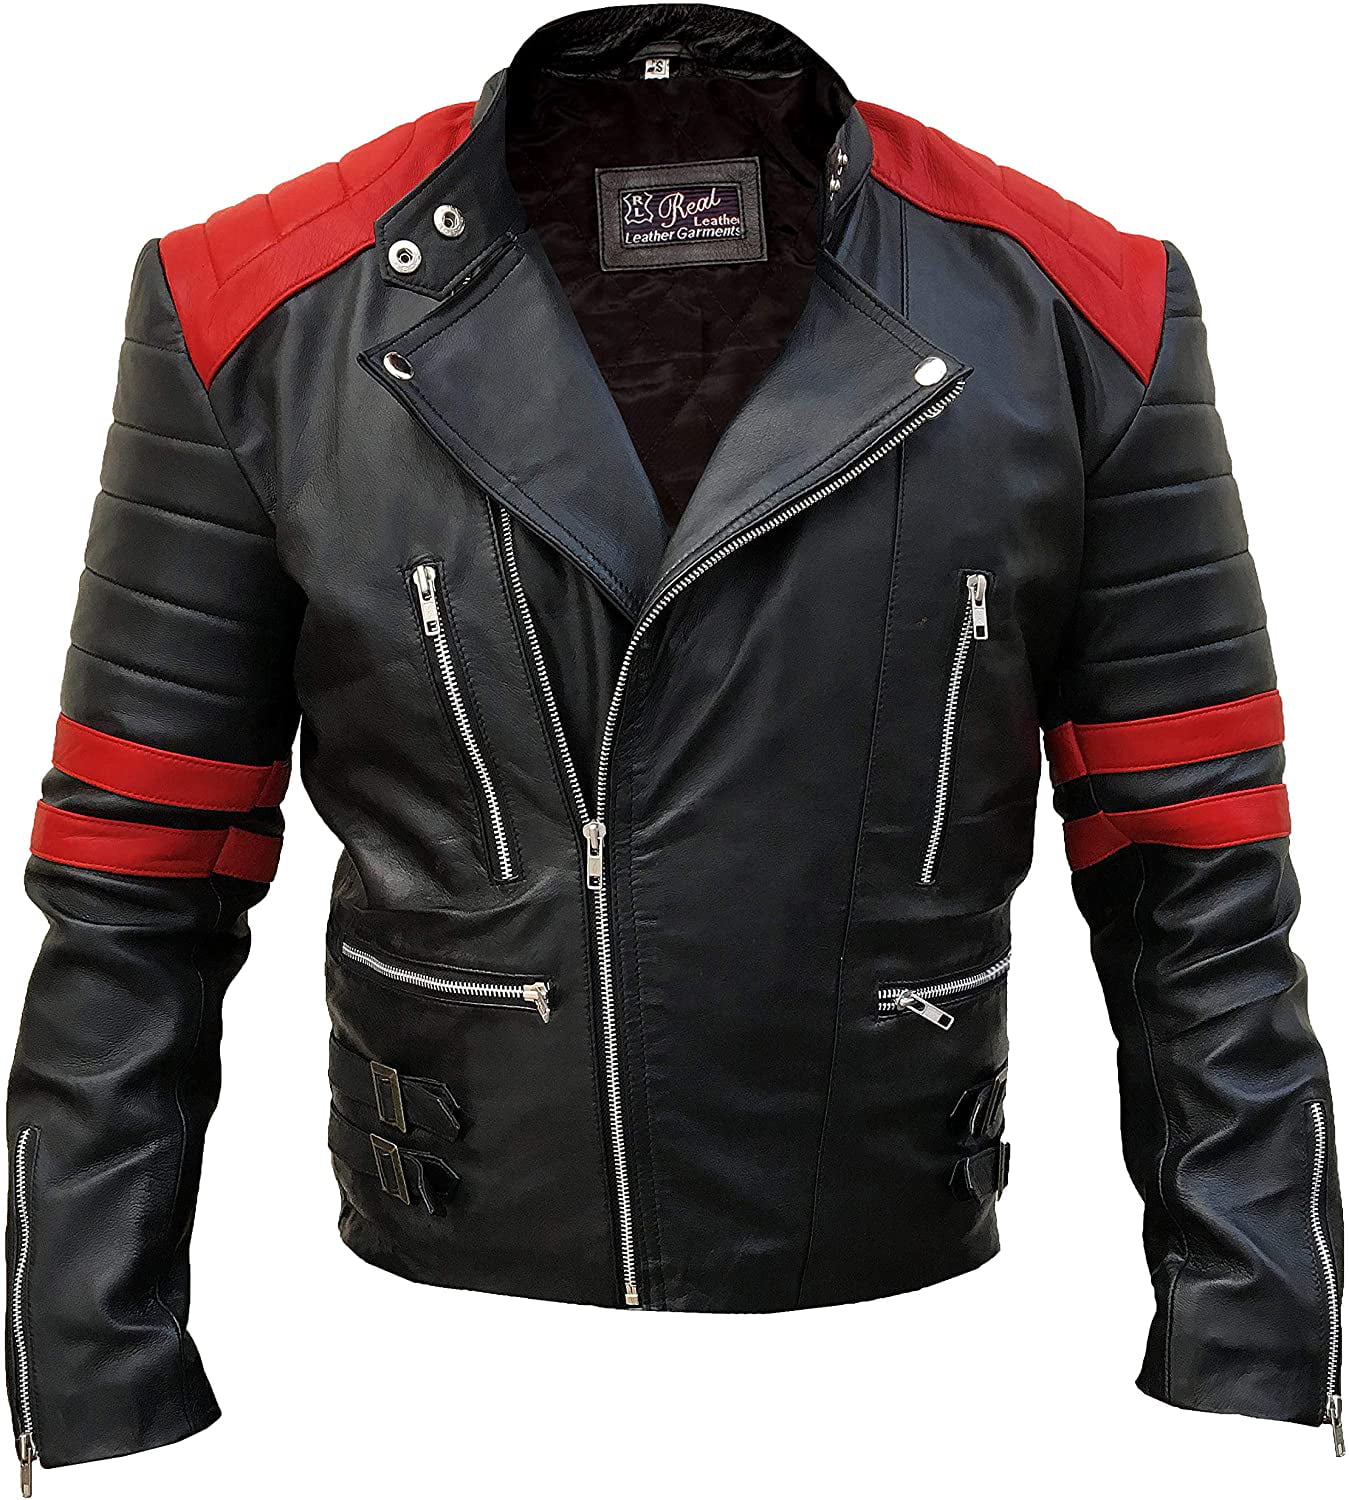 Outfit Craze Men's Brando Asymmetrical Biker Black and Red Leather Jacket – Leather Motorcycle